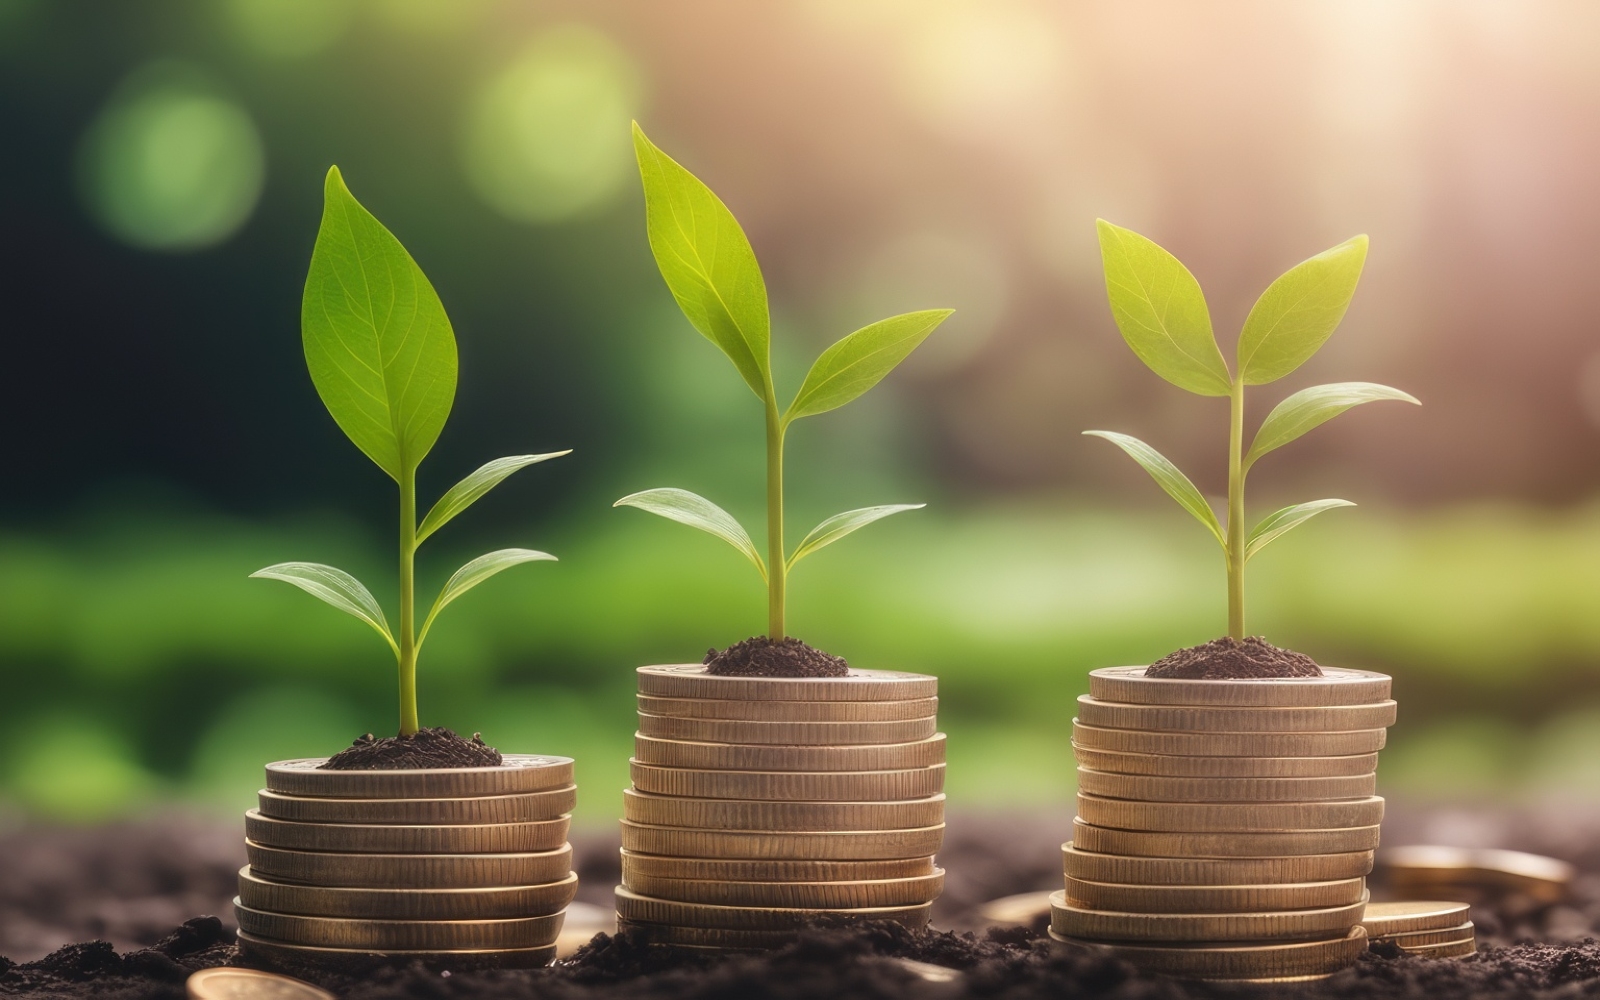 Premium Business Growing Plants on Coins Stacked on Green Blurred Background 28